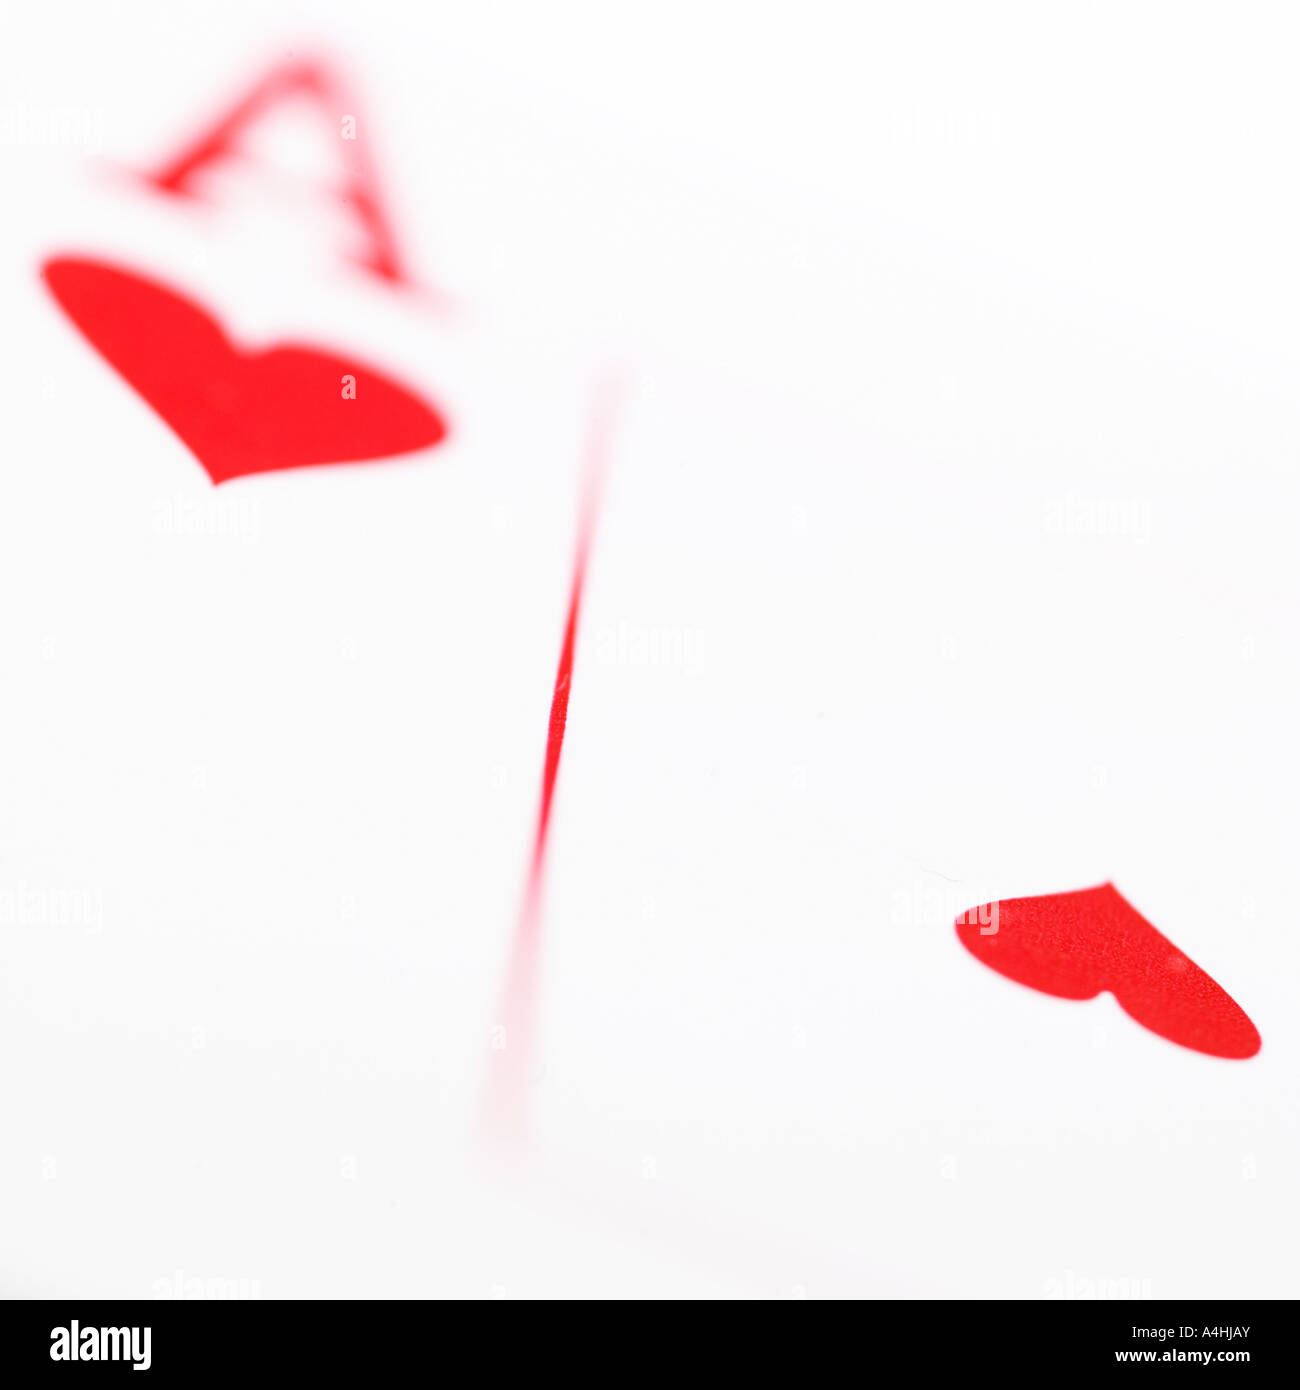 ace of hearts close up with shallow depth of field Stock Photo